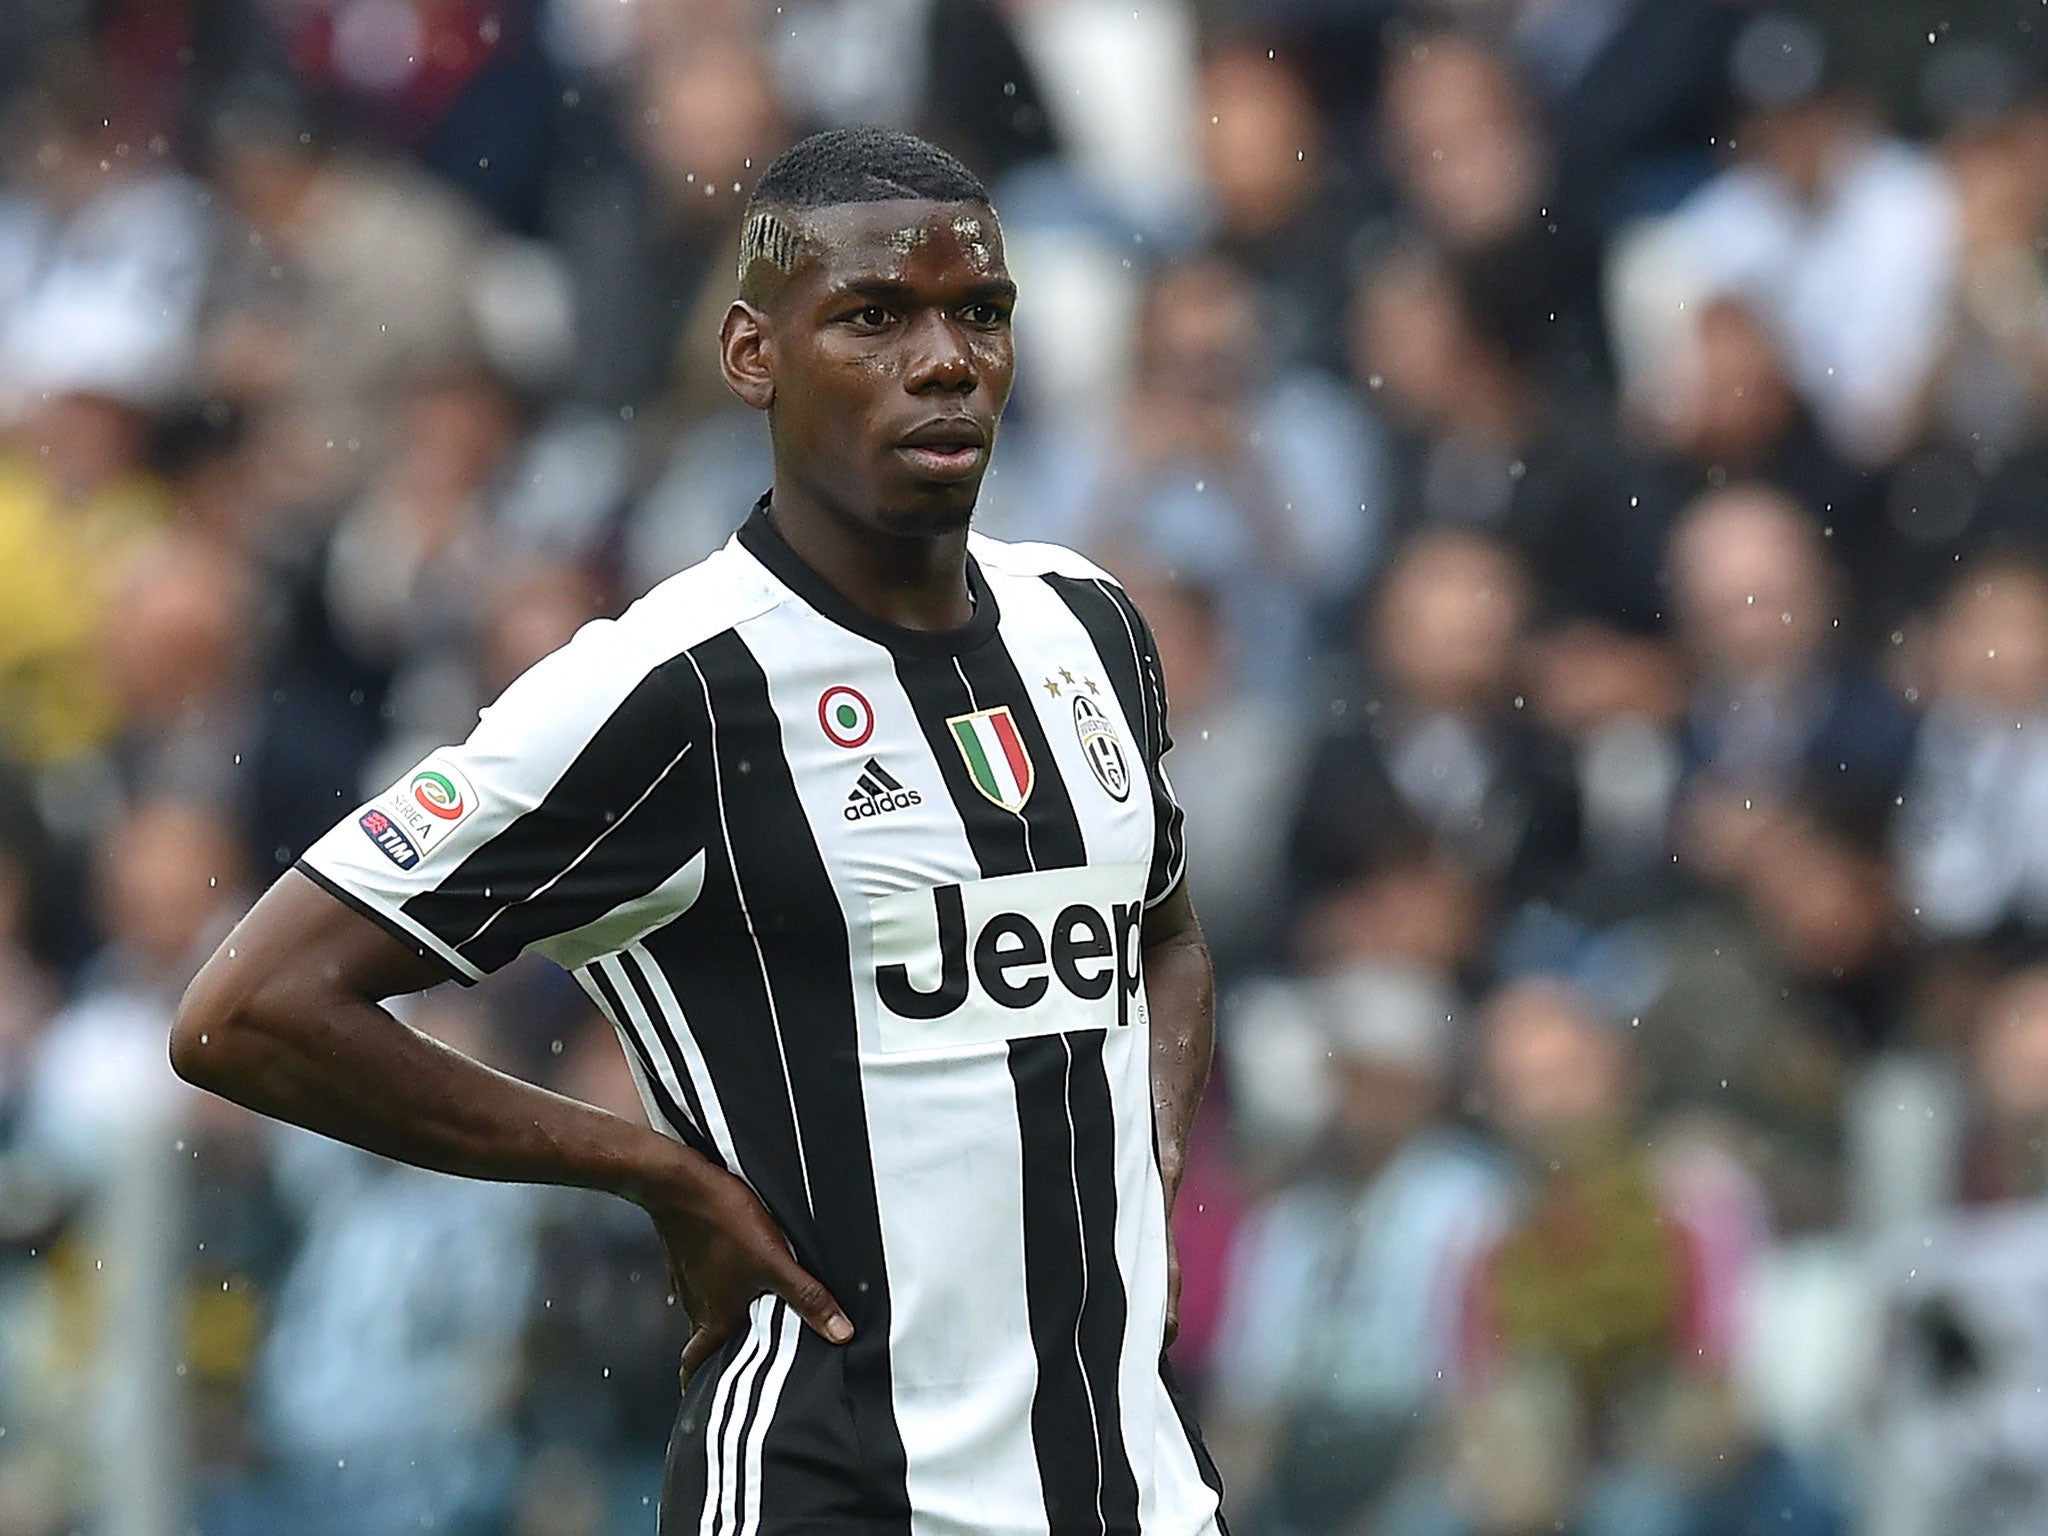 Pogba joined Juventus on a free transfer from United in 2012